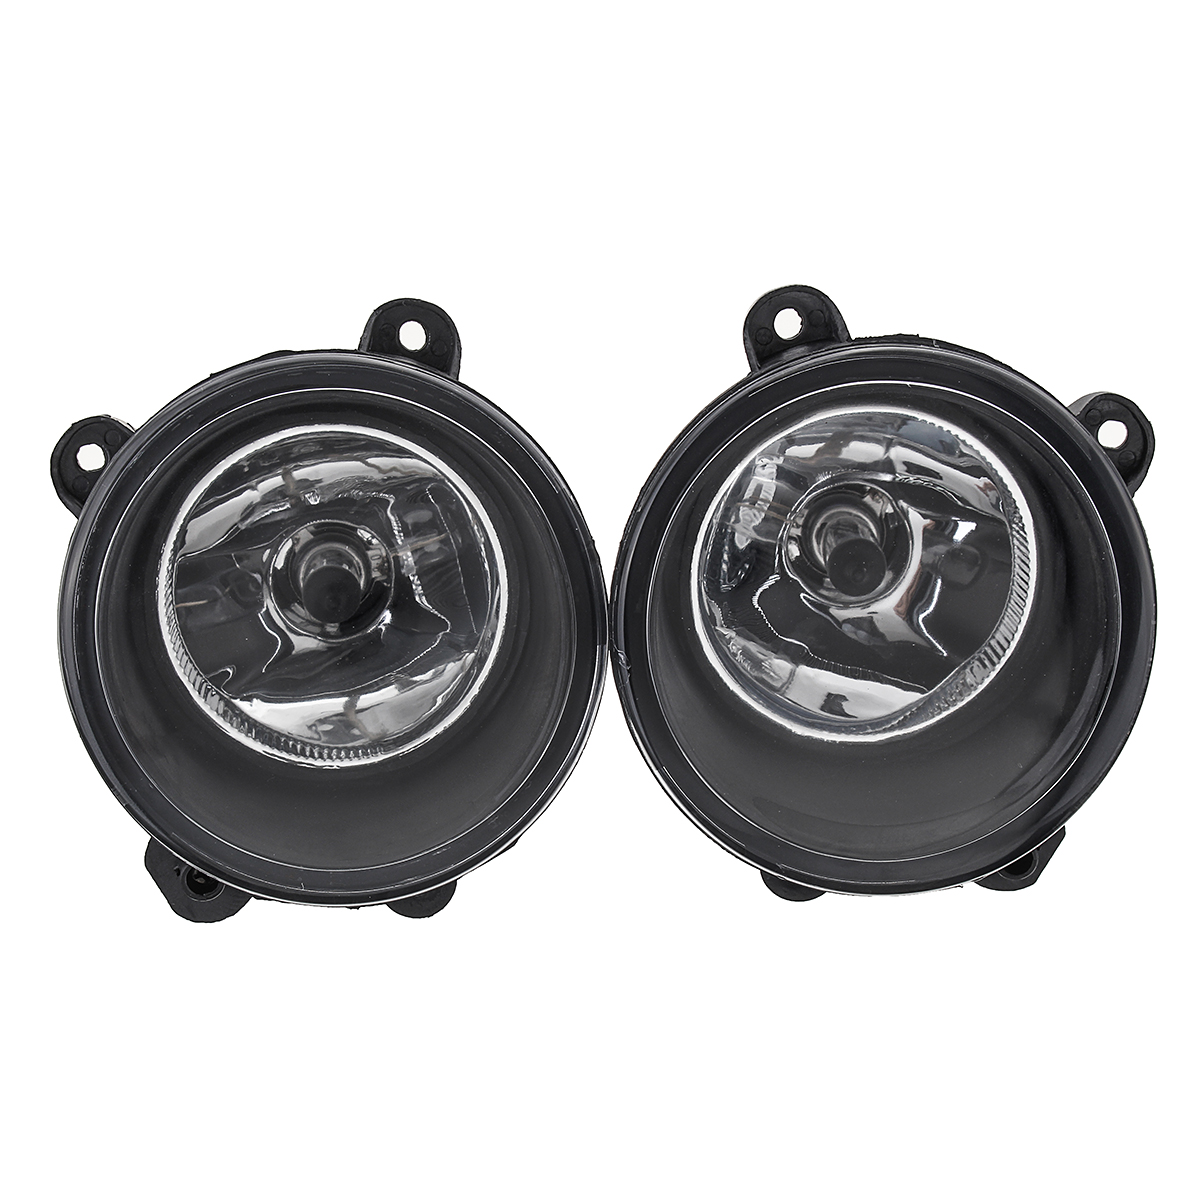 

Car Front Fog Lights with H11 Halogen Bulbs Pair For Land Rover Discovery 3 Range Rover Sport